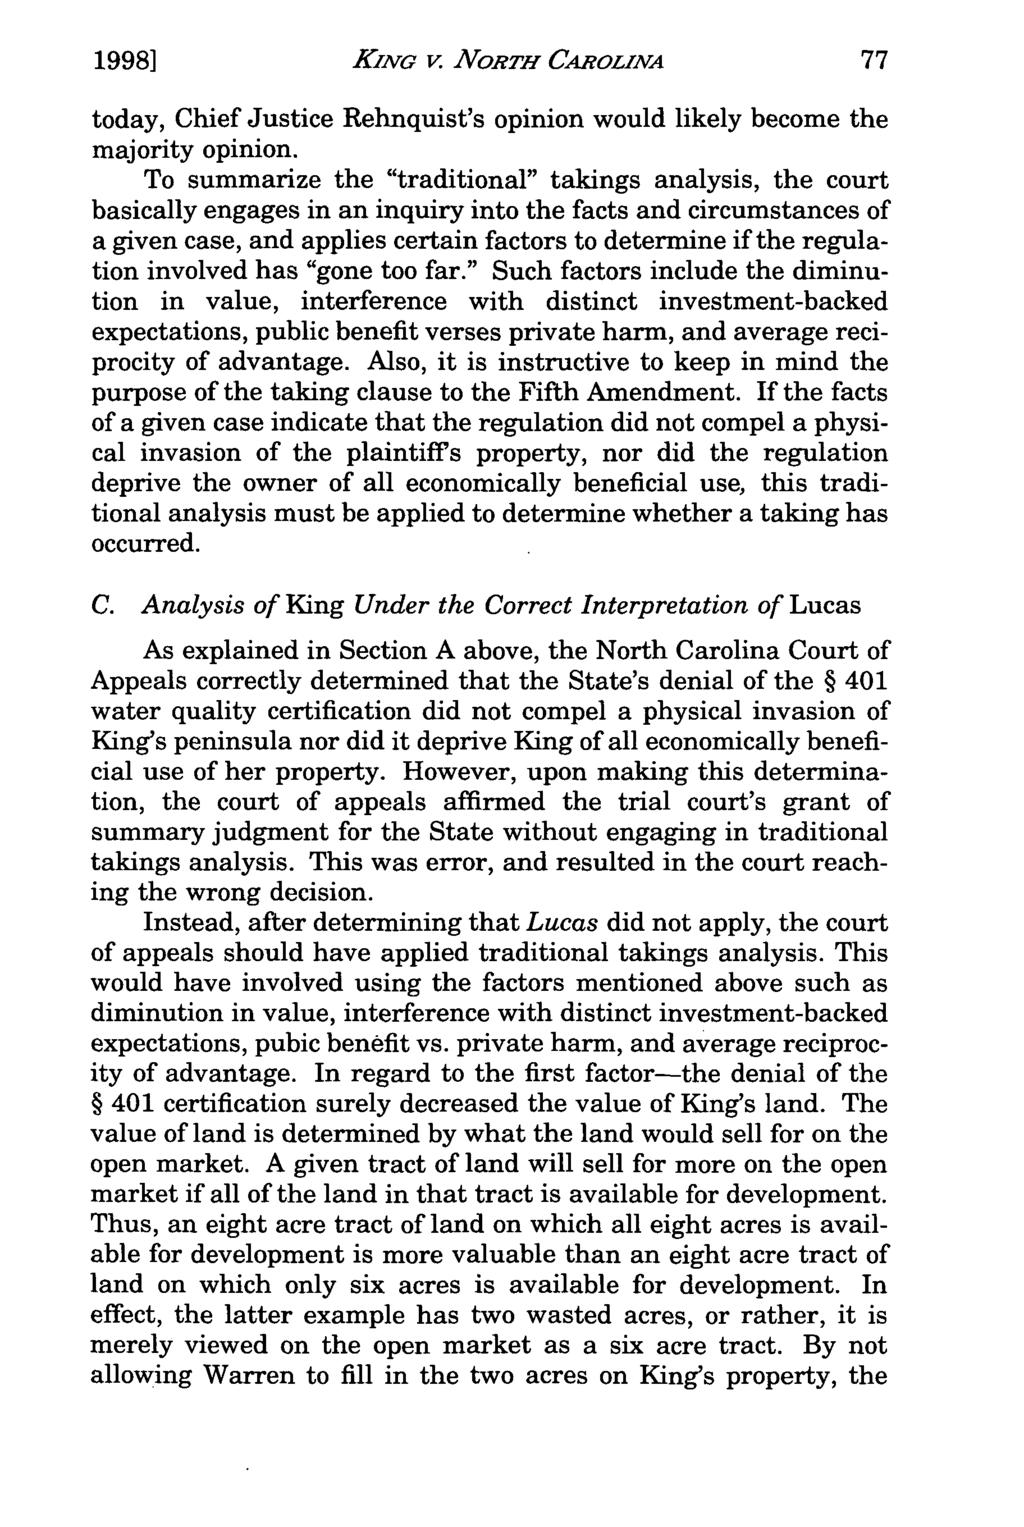 1998] Wells: King v. North KINAG Carolina: v. NORTH A Misinterpretation CAROLINA of the Lucas Takings today, Chief Justice Rehnquist's opinion would likely become the majority opinion.